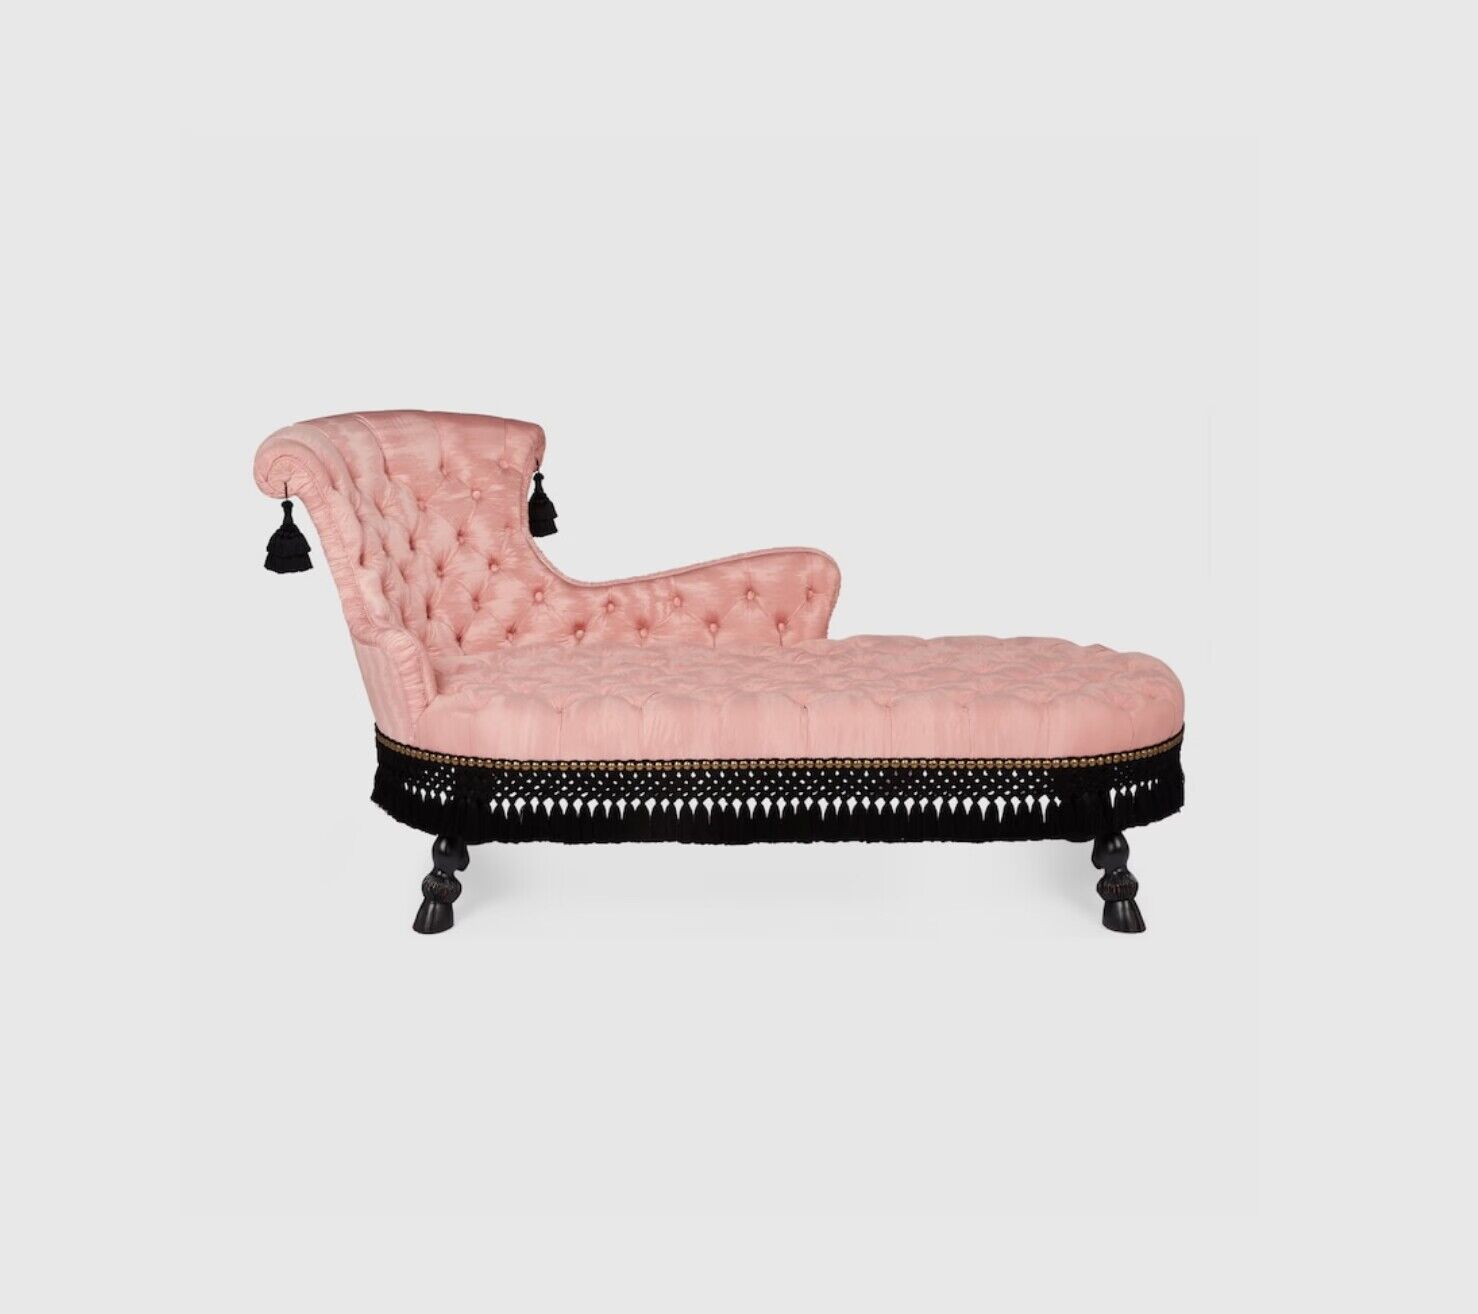 Furniture quilted moiré chaise longue